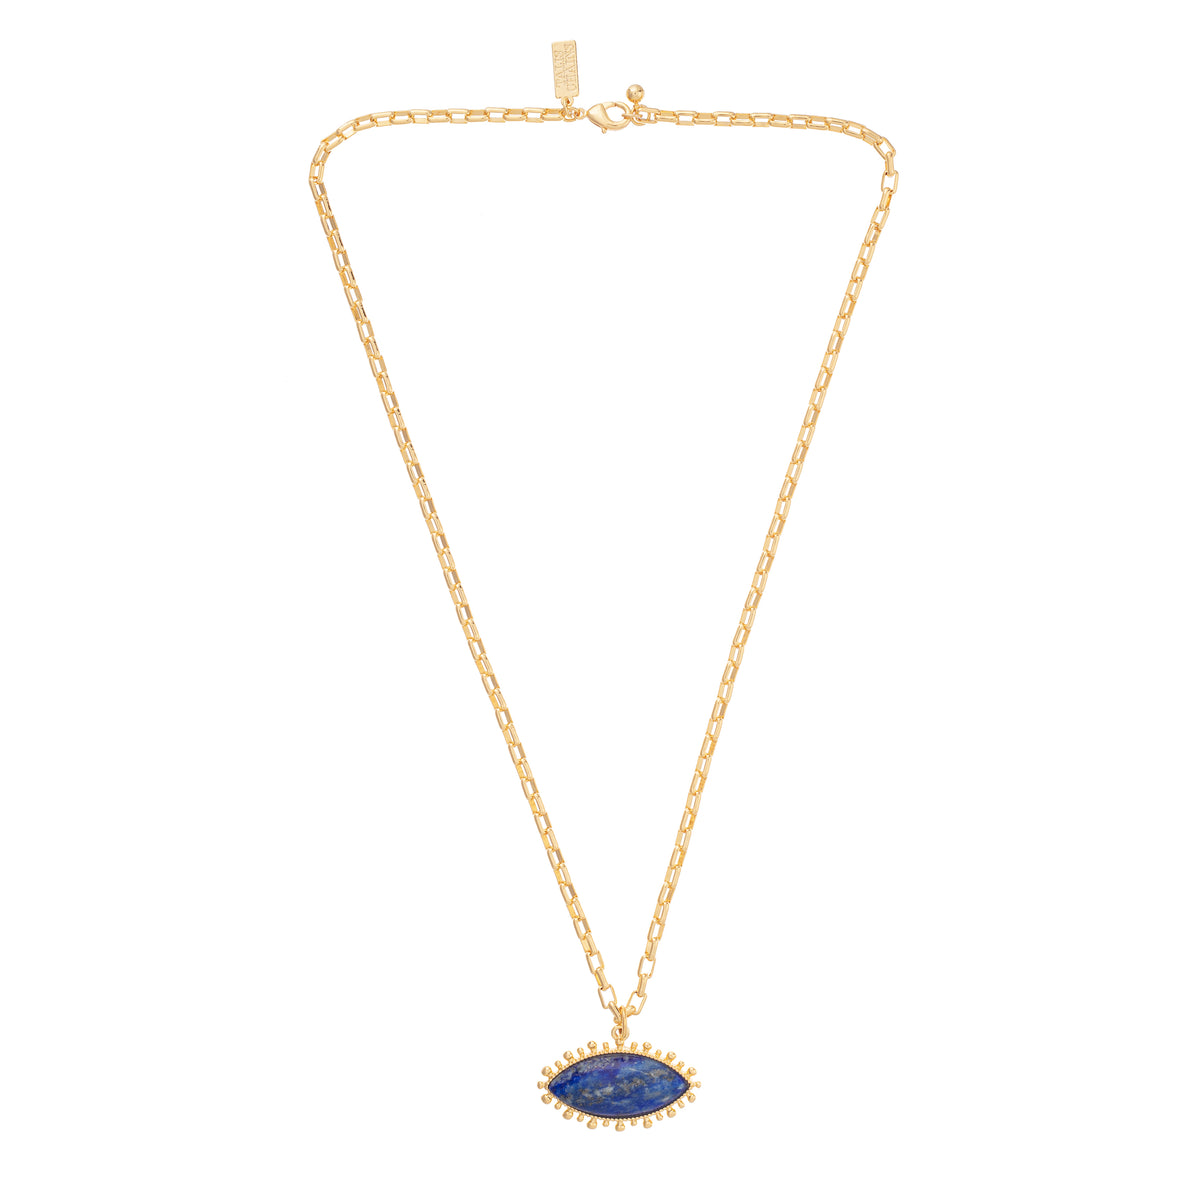 Lapis Lazuli evil eye necklace in gold plated recycled brass